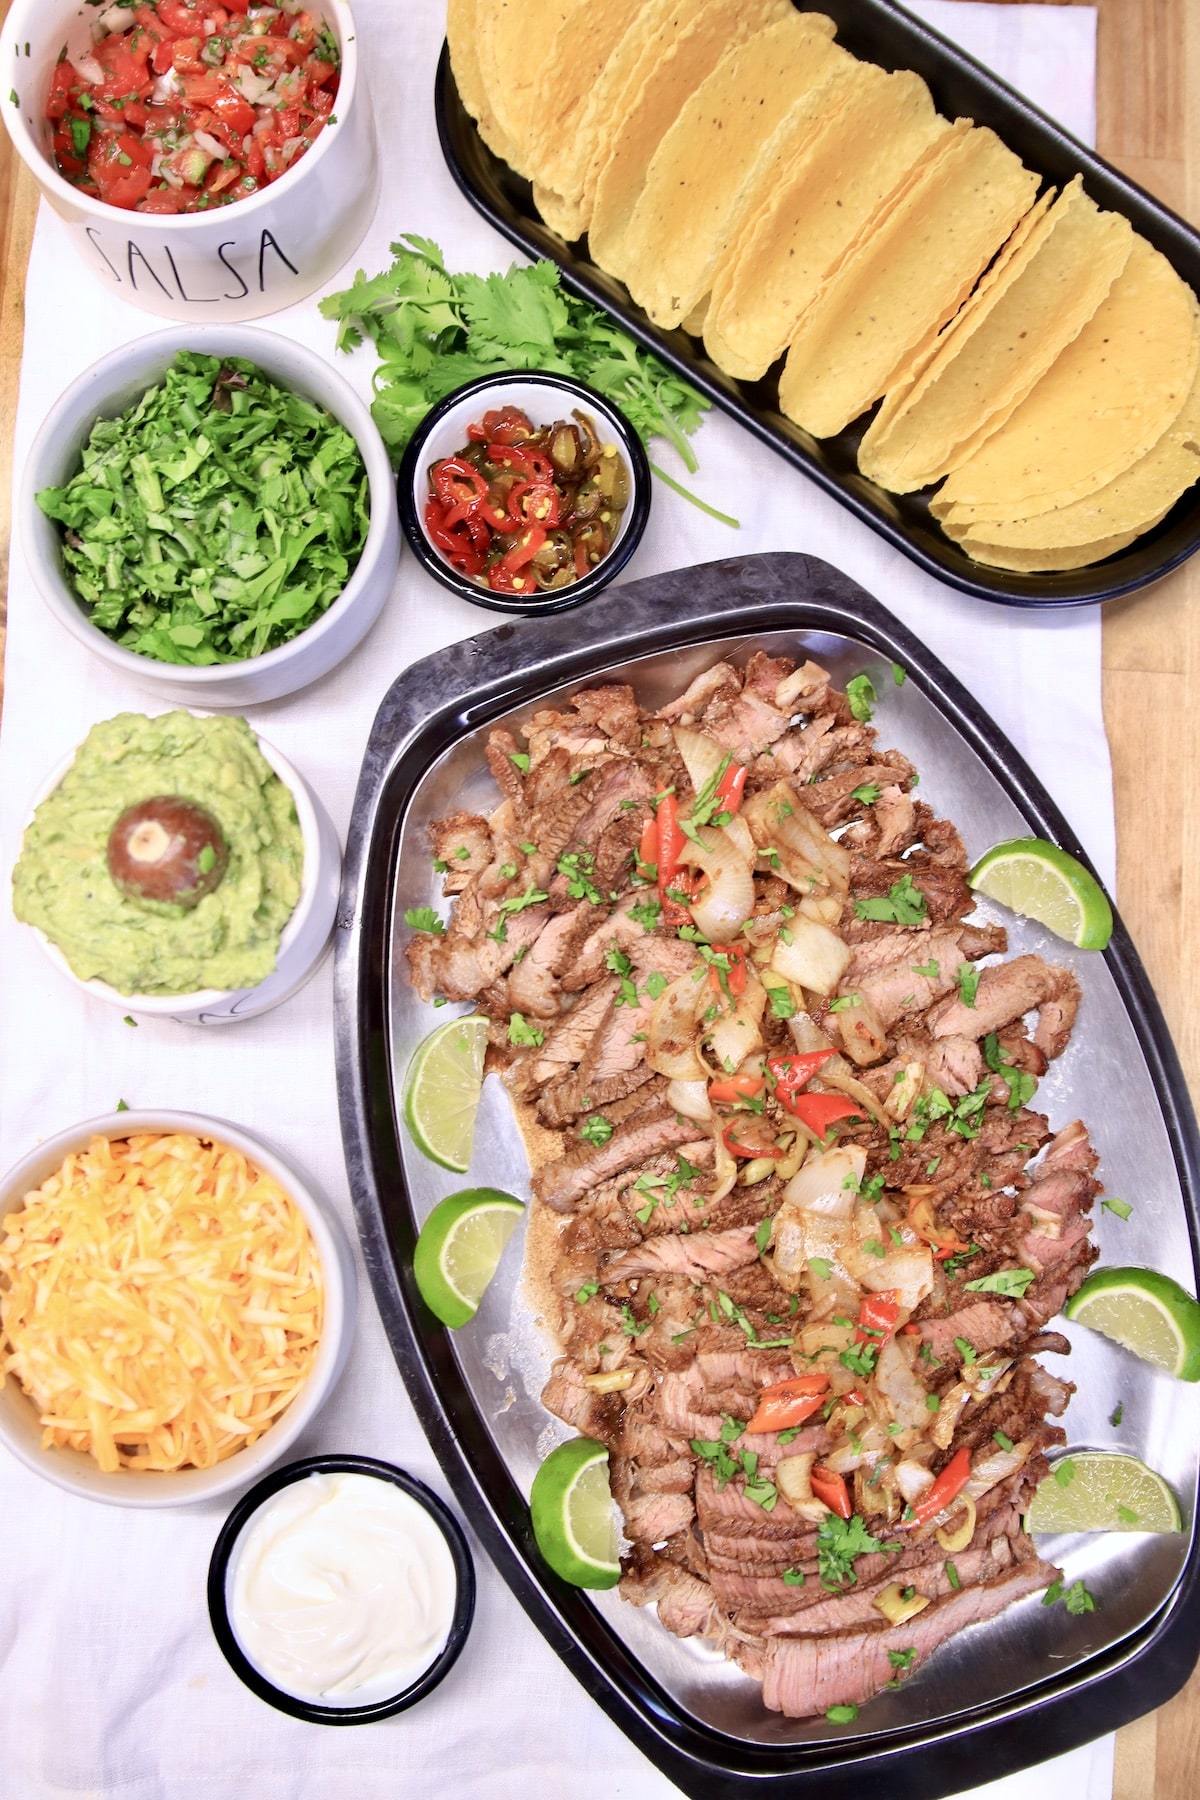 Platter of steak tacos with toppings and shells.